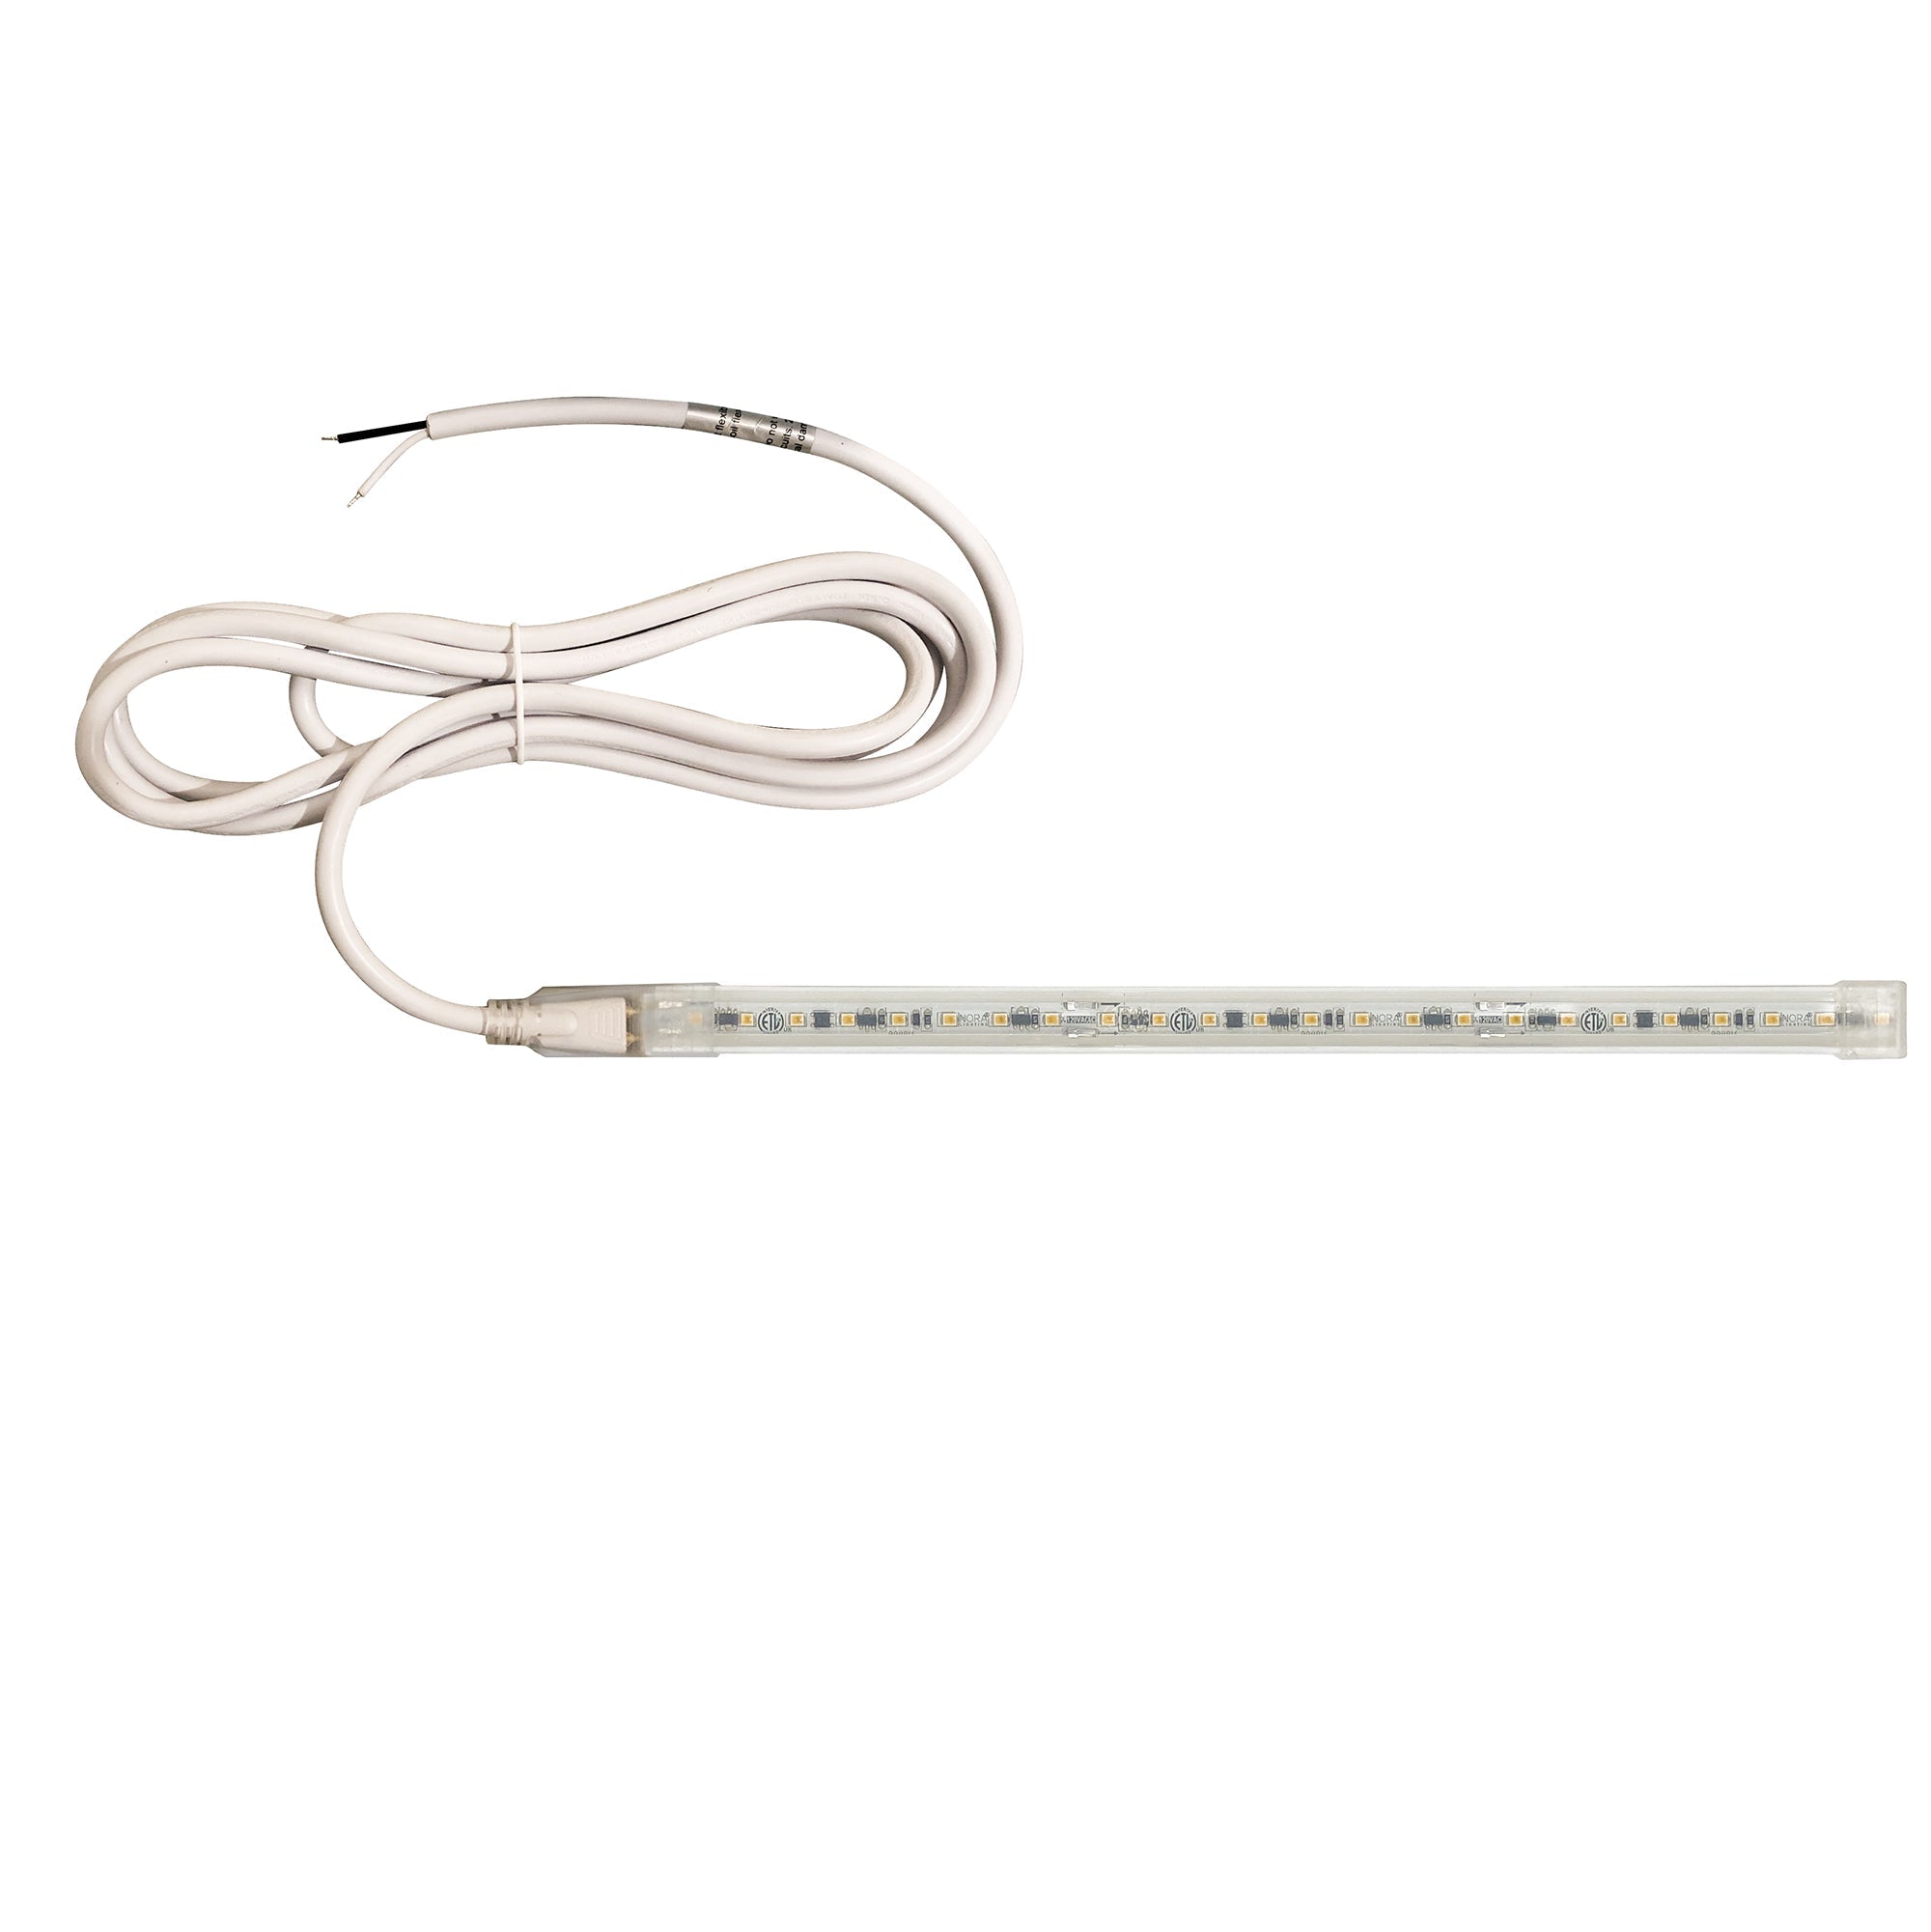 Nora Lighting NUTP13-W71-12-927/HW - Accent / Undercabinet - Custom Cut 71-ft 120V Continuous LED Tape Light, 330lm / 3.6W per foot, 2700K, w/ Mounting Clips and 8' Hardwired Power Cord